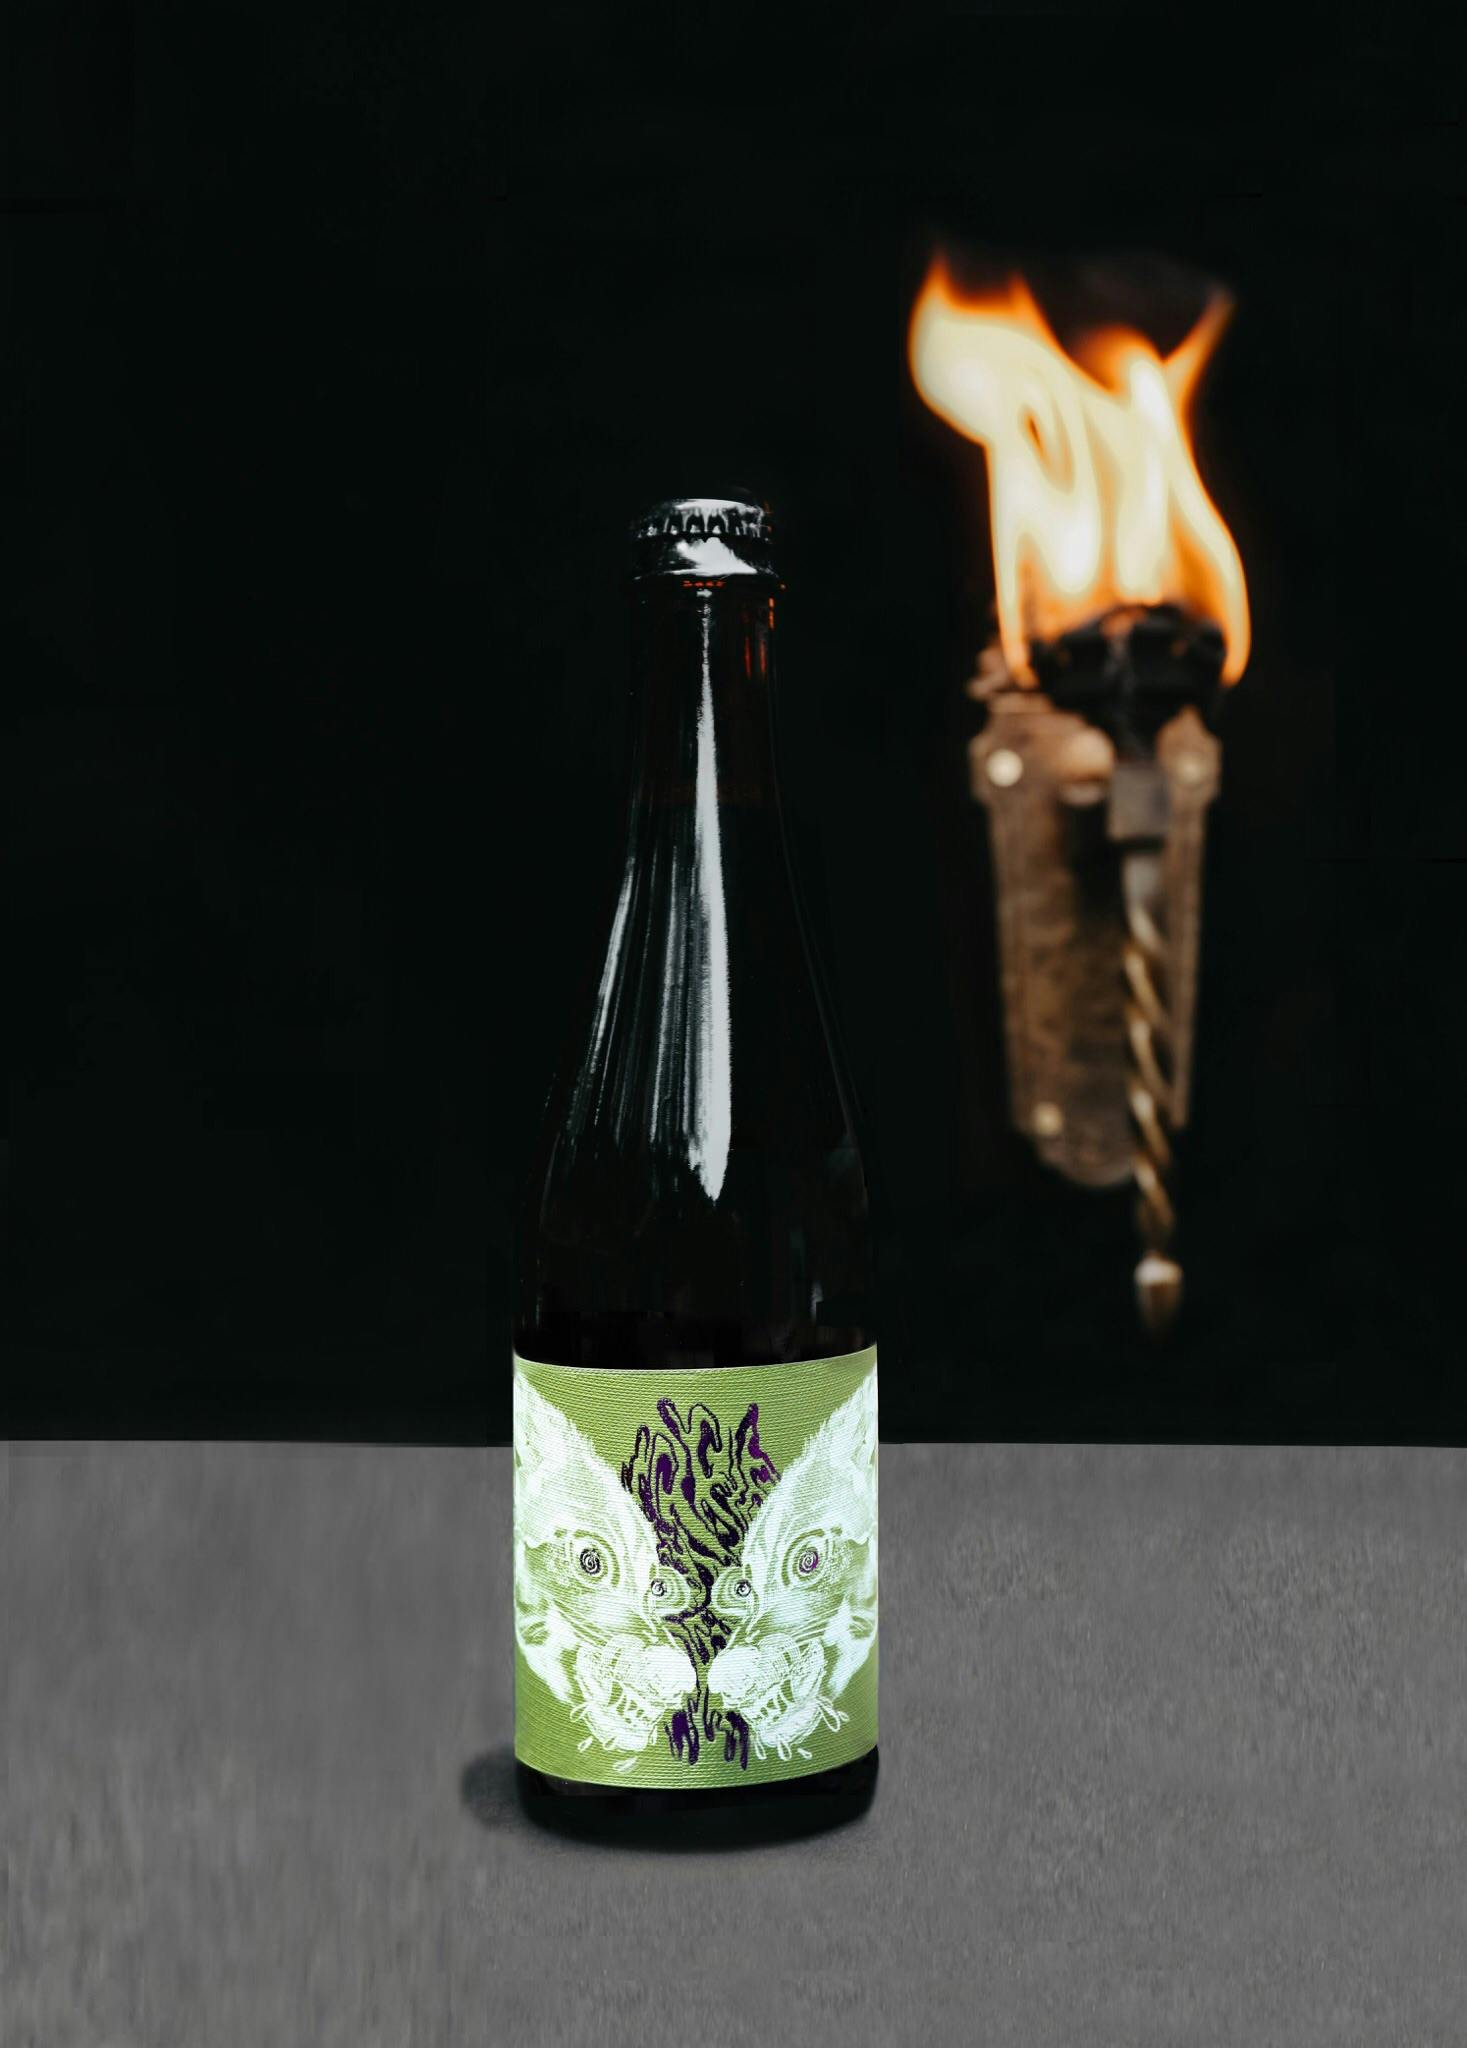 Apple Brandy Circle Of Wolves 500ml Bottle Not Available To Ship The Veil Brewing Online Shop